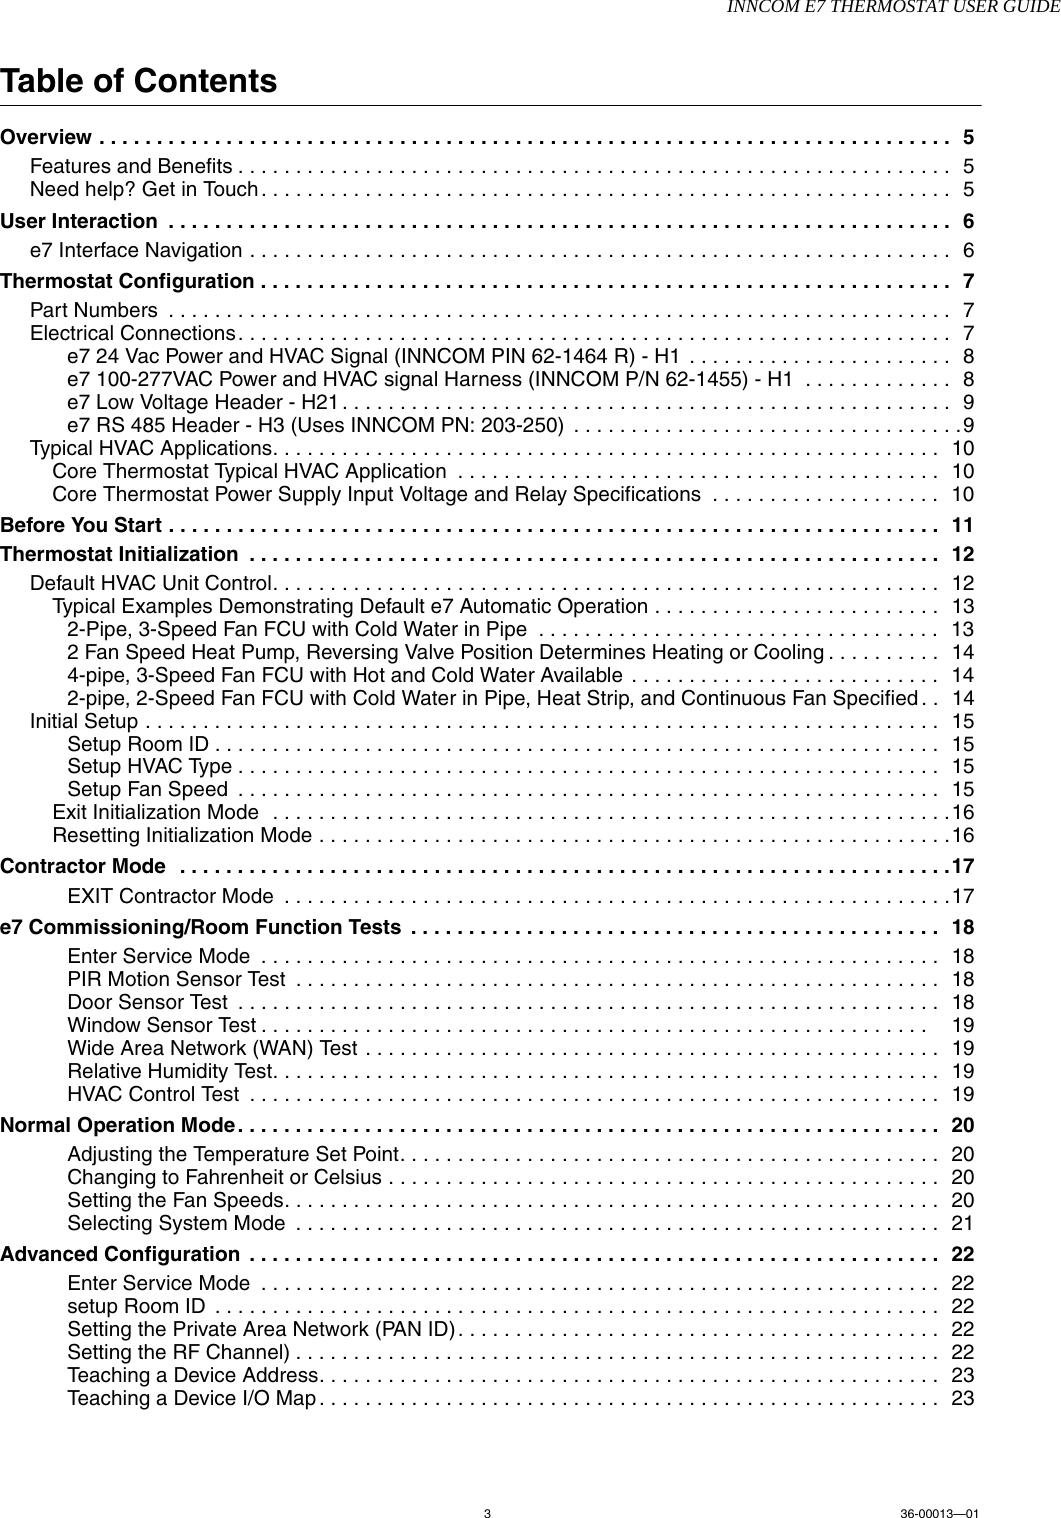 INNCOM E7 THERMOSTAT USER GUIDE336-00013—01Table of ContentsOverview . . . . . . . . . . . . . . . . . . . . . . . . . . . . . . . . . . . . . . . . . . . . . . . . . . . . . . . . . . . . . . . . . . . . . . . . . .  5Features and Benefits . . . . . . . . . . . . . . . . . . . . . . . . . . . . . . . . . . . . . . . . . . . . . . . . . . . . . . . . . . . . . .  5Need help? Get in Touch . . . . . . . . . . . . . . . . . . . . . . . . . . . . . . . . . . . . . . . . . . . . . . . . . . . . . . . . . . . .  5User Interaction  . . . . . . . . . . . . . . . . . . . . . . . . . . . . . . . . . . . . . . . . . . . . . . . . . . . . . . . . . . . . . . . . . . . .  6e7 Interface Navigation . . . . . . . . . . . . . . . . . . . . . . . . . . . . . . . . . . . . . . . . . . . . . . . . . . . . . . . . . . . . .  6Thermostat Configuration . . . . . . . . . . . . . . . . . . . . . . . . . . . . . . . . . . . . . . . . . . . . . . . . . . . . . . . . . . . .  7Part Numbers  . . . . . . . . . . . . . . . . . . . . . . . . . . . . . . . . . . . . . . . . . . . . . . . . . . . . . . . . . . . . . . . . . . . .  7Electrical Connections. . . . . . . . . . . . . . . . . . . . . . . . . . . . . . . . . . . . . . . . . . . . . . . . . . . . . . . . . . . . . .  7e7 24 Vac Power and HVAC Signal (INNCOM PIN 62-1464 R) - H1  . . . . . . . . . . . . . . . . . . . . . . .  8e7 100-277VAC Power and HVAC signal Harness (INNCOM P/N 62-1455) - H1  . . . . . . . . . . . . .  8e7 Low Voltage Header - H21 . . . . . . . . . . . . . . . . . . . . . . . . . . . . . . . . . . . . . . . . . . . . . . . . . . . . .  9e7 RS 485 Header - H3 (Uses INNCOM PN: 203-250)  . . . . . . . . . . . . . . . . . . . . . . . . . . . . . . . . . .9Typical HVAC Applications. . . . . . . . . . . . . . . . . . . . . . . . . . . . . . . . . . . . . . . . . . . . . . . . . . . . . . . . . .  10Core Thermostat Typical HVAC Application  . . . . . . . . . . . . . . . . . . . . . . . . . . . . . . . . . . . . . . . . . .  10Core Thermostat Power Supply Input Voltage and Relay Specifications  . . . . . . . . . . . . . . . . . . . .  10Before You Start . . . . . . . . . . . . . . . . . . . . . . . . . . . . . . . . . . . . . . . . . . . . . . . . . . . . . . . . . . . . . . . . . . .  11Thermostat Initialization  . . . . . . . . . . . . . . . . . . . . . . . . . . . . . . . . . . . . . . . . . . . . . . . . . . . . . . . . . . . .  12Default HVAC Unit Control. . . . . . . . . . . . . . . . . . . . . . . . . . . . . . . . . . . . . . . . . . . . . . . . . . . . . . . . . .  12Typical Examples Demonstrating Default e7 Automatic Operation . . . . . . . . . . . . . . . . . . . . . . . . .  132-Pipe, 3-Speed Fan FCU with Cold Water in Pipe  . . . . . . . . . . . . . . . . . . . . . . . . . . . . . . . . . . .  132 Fan Speed Heat Pump, Reversing Valve Position Determines Heating or Cooling . . . . . . . . . .  144-pipe, 3-Speed Fan FCU with Hot and Cold Water Available . . . . . . . . . . . . . . . . . . . . . . . . . . .  142-pipe, 2-Speed Fan FCU with Cold Water in Pipe, Heat Strip, and Continuous Fan Specified . .  14Initial Setup . . . . . . . . . . . . . . . . . . . . . . . . . . . . . . . . . . . . . . . . . . . . . . . . . . . . . . . . . . . . . . . . . . . . .  15Setup Room ID . . . . . . . . . . . . . . . . . . . . . . . . . . . . . . . . . . . . . . . . . . . . . . . . . . . . . . . . . . . . . . .  15Setup HVAC Type . . . . . . . . . . . . . . . . . . . . . . . . . . . . . . . . . . . . . . . . . . . . . . . . . . . . . . . . . . . . .  15Setup Fan Speed  . . . . . . . . . . . . . . . . . . . . . . . . . . . . . . . . . . . . . . . . . . . . . . . . . . . . . . . . . . . . .  15Exit Initialization Mode  . . . . . . . . . . . . . . . . . . . . . . . . . . . . . . . . . . . . . . . . . . . . . . . . . . . . . . . . . . .16Resetting Initialization Mode . . . . . . . . . . . . . . . . . . . . . . . . . . . . . . . . . . . . . . . . . . . . . . . . . . . . . . .16Contractor Mode   . . . . . . . . . . . . . . . . . . . . . . . . . . . . . . . . . . . . . . . . . . . . . . . . . . . . . . . . . . . . . . . . . . .17EXIT Contractor Mode  . . . . . . . . . . . . . . . . . . . . . . . . . . . . . . . . . . . . . . . . . . . . . . . . . . . . . . . . . .17e7 Commissioning/Room Function Tests  . . . . . . . . . . . . . . . . . . . . . . . . . . . . . . . . . . . . . . . . . . . . . .  18Enter Service Mode  . . . . . . . . . . . . . . . . . . . . . . . . . . . . . . . . . . . . . . . . . . . . . . . . . . . . . . . . . . .  18PIR Motion Sensor Test  . . . . . . . . . . . . . . . . . . . . . . . . . . . . . . . . . . . . . . . . . . . . . . . . . . . . . . . .  18Door Sensor Test  . . . . . . . . . . . . . . . . . . . . . . . . . . . . . . . . . . . . . . . . . . . . . . . . . . . . . . . . . . . . .  18Window Sensor Test . . . . . . . . . . . . . . . . . . . . . . . . . . . . . . . . . . . . . . . . . . . . . . . . . . . . . . . . . .    19Wide Area Network (WAN) Test . . . . . . . . . . . . . . . . . . . . . . . . . . . . . . . . . . . . . . . . . . . . . . . . . .  19Relative Humidity Test. . . . . . . . . . . . . . . . . . . . . . . . . . . . . . . . . . . . . . . . . . . . . . . . . . . . . . . . . .  19HVAC Control Test  . . . . . . . . . . . . . . . . . . . . . . . . . . . . . . . . . . . . . . . . . . . . . . . . . . . . . . . . . . . .  19Normal Operation Mode . . . . . . . . . . . . . . . . . . . . . . . . . . . . . . . . . . . . . . . . . . . . . . . . . . . . . . . . . . . . .  20Adjusting the Temperature Set Point. . . . . . . . . . . . . . . . . . . . . . . . . . . . . . . . . . . . . . . . . . . . . . .  20Changing to Fahrenheit or Celsius . . . . . . . . . . . . . . . . . . . . . . . . . . . . . . . . . . . . . . . . . . . . . . . .  20Setting the Fan Speeds. . . . . . . . . . . . . . . . . . . . . . . . . . . . . . . . . . . . . . . . . . . . . . . . . . . . . . . . .  20Selecting System Mode  . . . . . . . . . . . . . . . . . . . . . . . . . . . . . . . . . . . . . . . . . . . . . . . . . . . . . . . .  21Advanced Configuration  . . . . . . . . . . . . . . . . . . . . . . . . . . . . . . . . . . . . . . . . . . . . . . . . . . . . . . . . . . . .  22Enter Service Mode  . . . . . . . . . . . . . . . . . . . . . . . . . . . . . . . . . . . . . . . . . . . . . . . . . . . . . . . . . . .  22setup Room ID  . . . . . . . . . . . . . . . . . . . . . . . . . . . . . . . . . . . . . . . . . . . . . . . . . . . . . . . . . . . . . . .  22Setting the Private Area Network (PAN ID) . . . . . . . . . . . . . . . . . . . . . . . . . . . . . . . . . . . . . . . . . .  22Setting the RF Channel) . . . . . . . . . . . . . . . . . . . . . . . . . . . . . . . . . . . . . . . . . . . . . . . . . . . . . . . .  22Teaching a Device Address. . . . . . . . . . . . . . . . . . . . . . . . . . . . . . . . . . . . . . . . . . . . . . . . . . . . . .  23Teaching a Device I/O Map . . . . . . . . . . . . . . . . . . . . . . . . . . . . . . . . . . . . . . . . . . . . . . . . . . . . . .  23